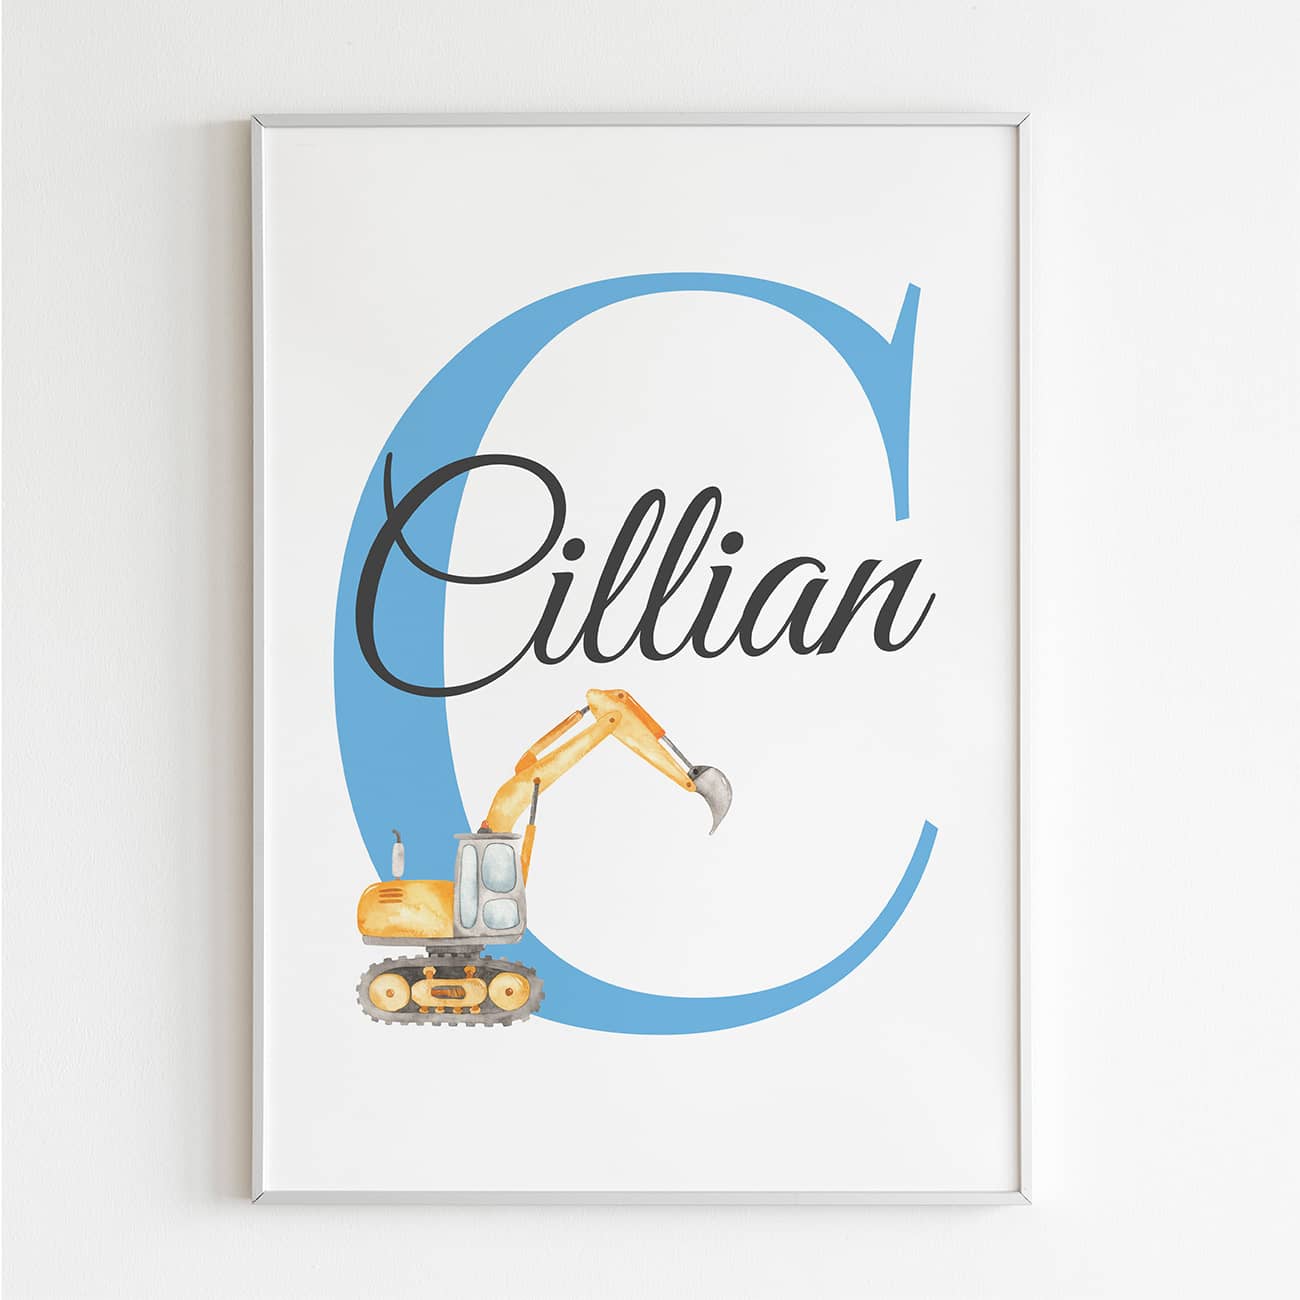 Cute Construction Posters for Children's Room with Child's Initial